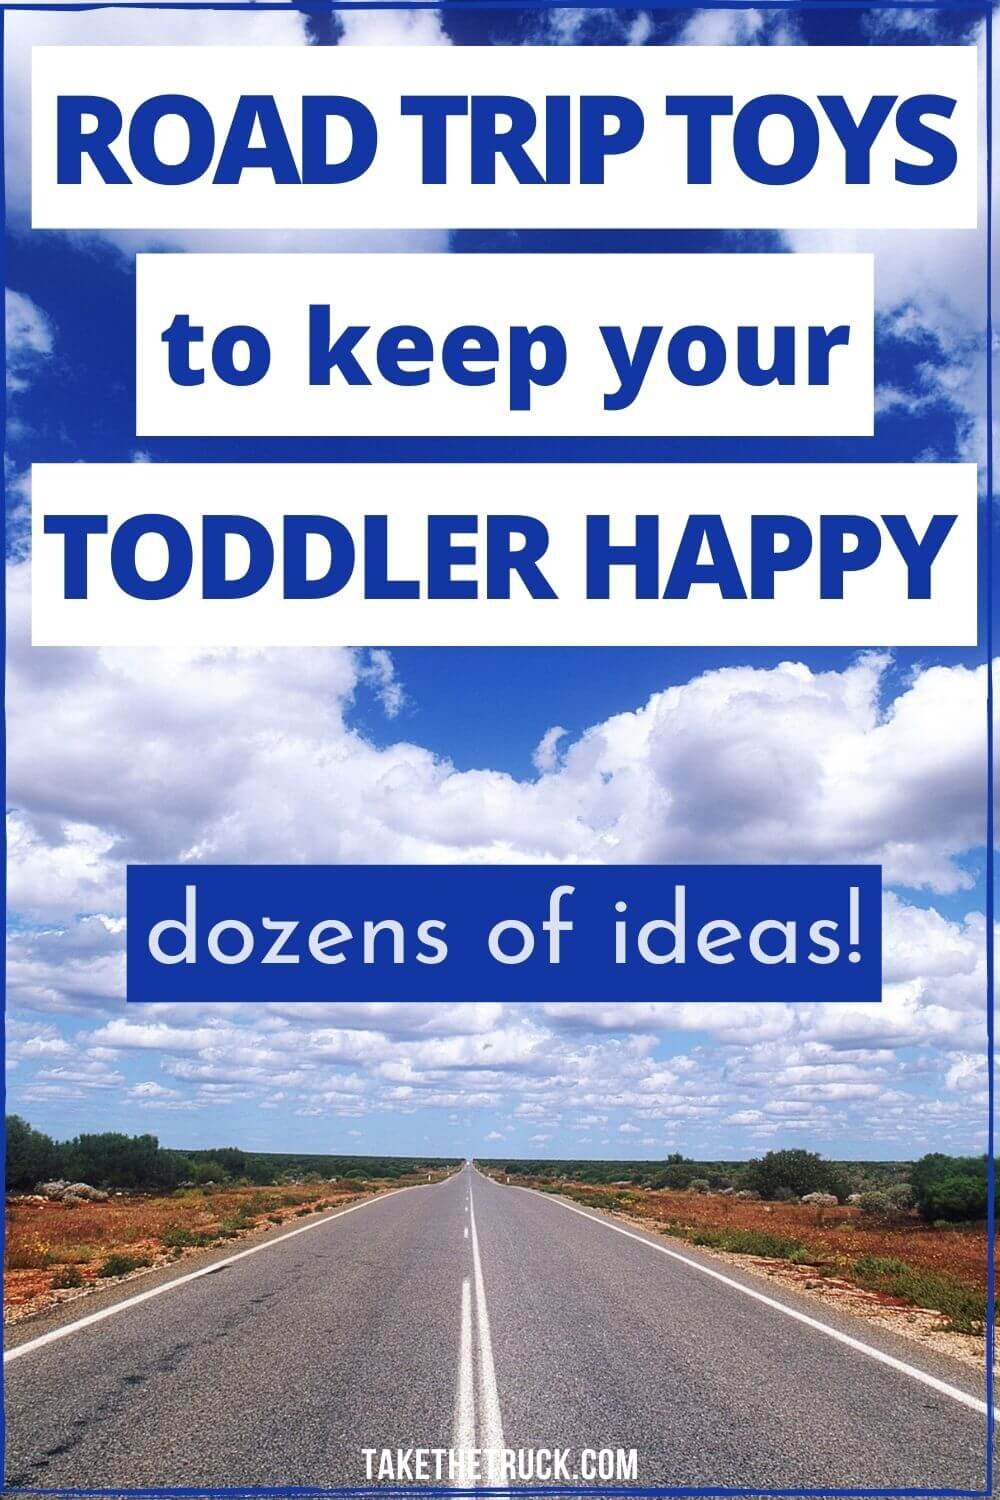 This post is filled with road trip activities for toddlers, whether you’re looking for DIY road trip activities or for the best travel toys to purchase as road trip entertainment for your toddler.